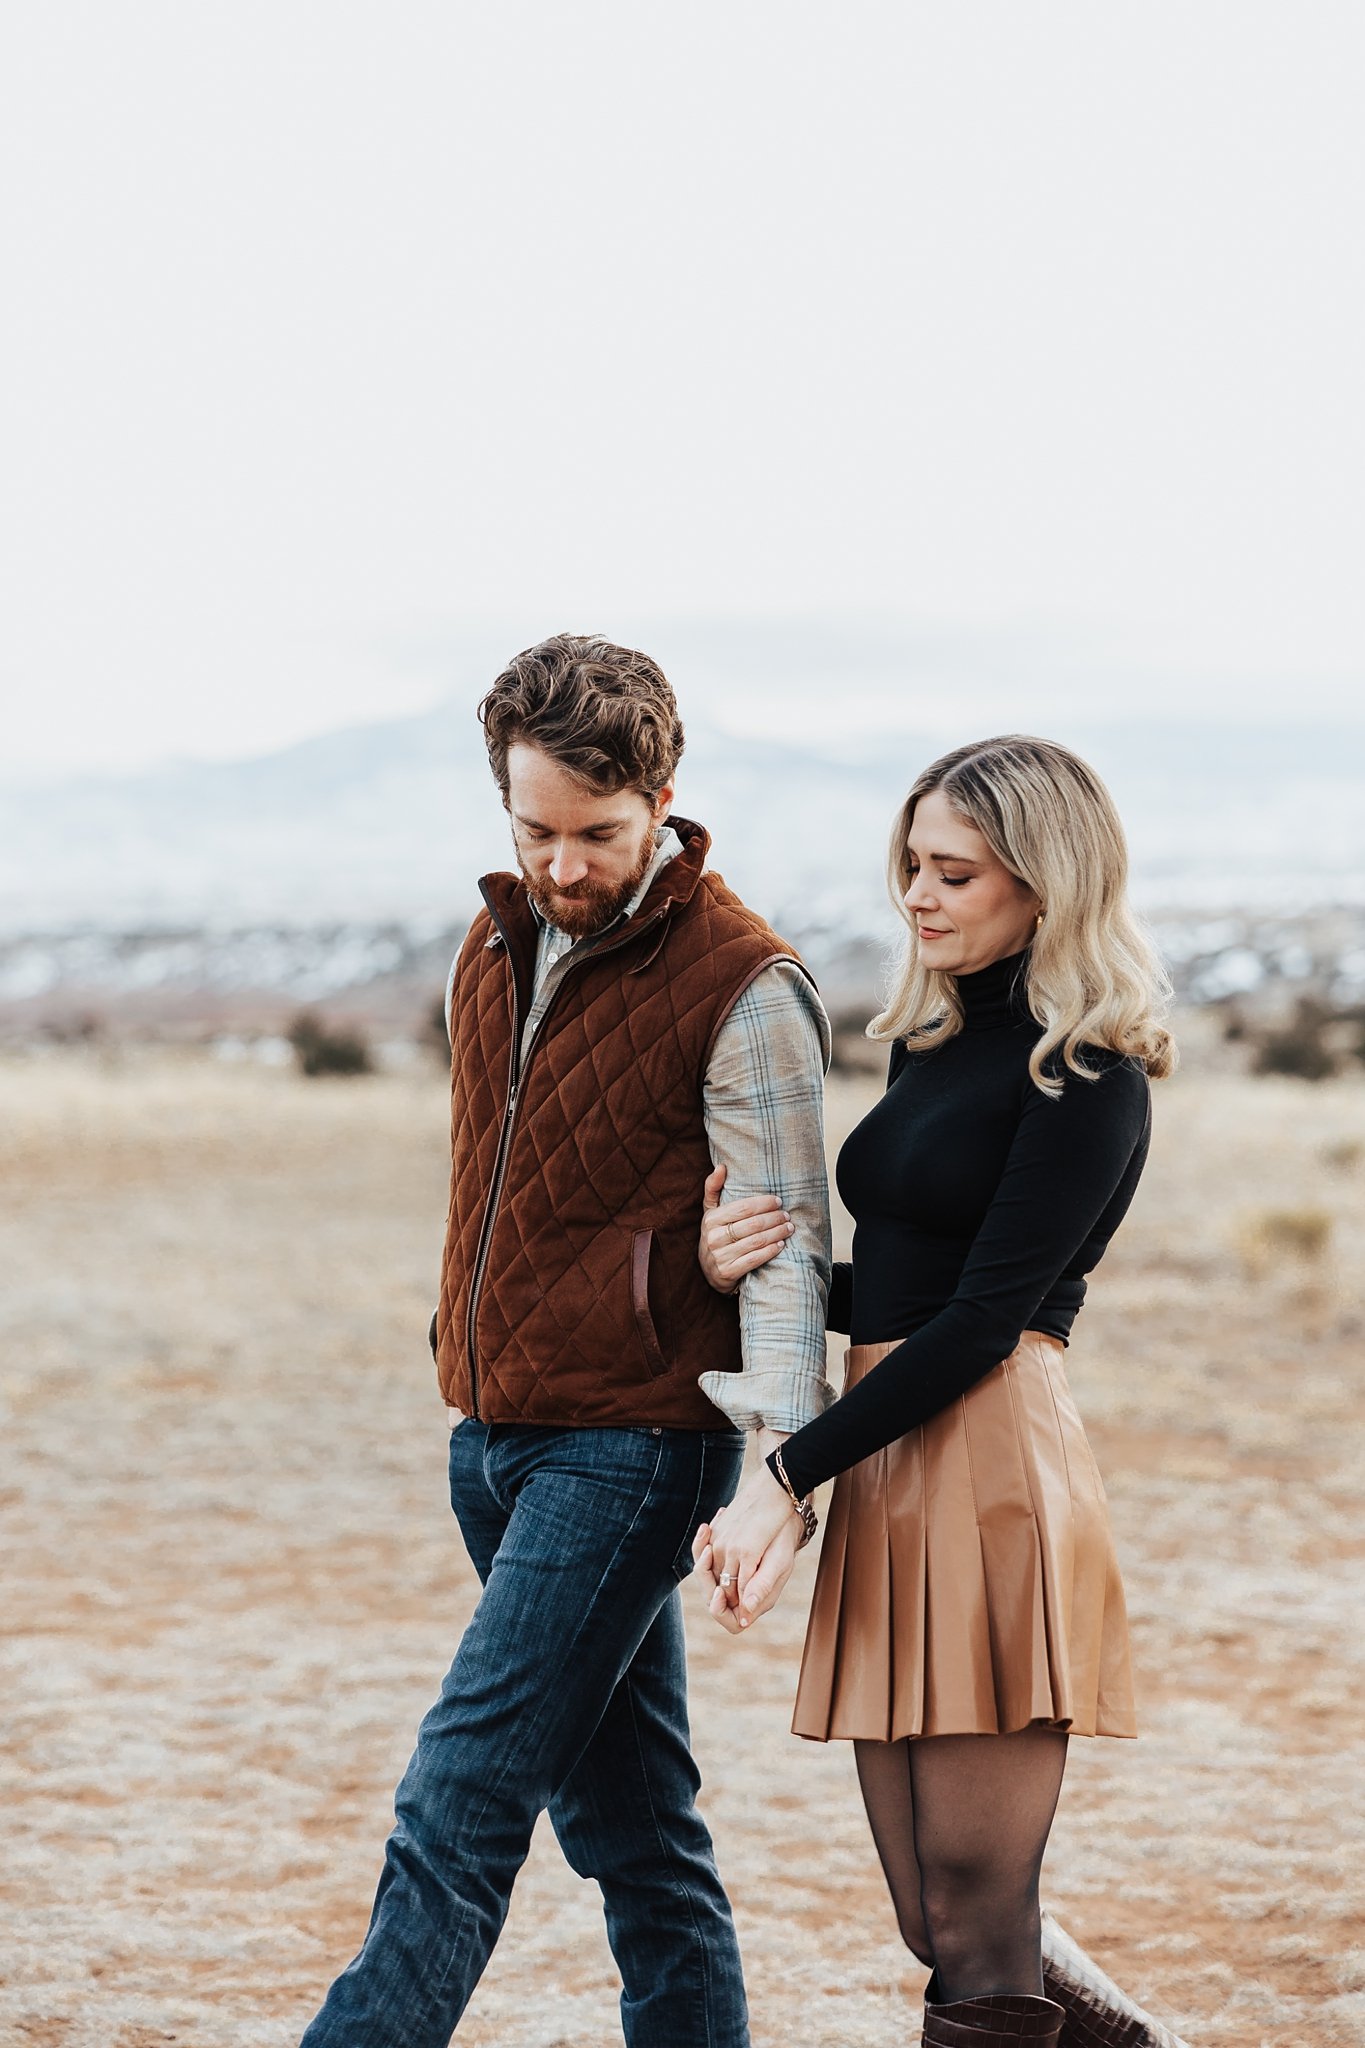 Alicia+lucia+photography+-+albuquerque+wedding+photographer+-+santa+fe+wedding+photography+-+new+mexico+wedding+photographer+-+new+mexico+wedding+-+southwest+engagement+-+ghost+ranch+engagement+-+ghost+ranch+wedding_0080.jpg